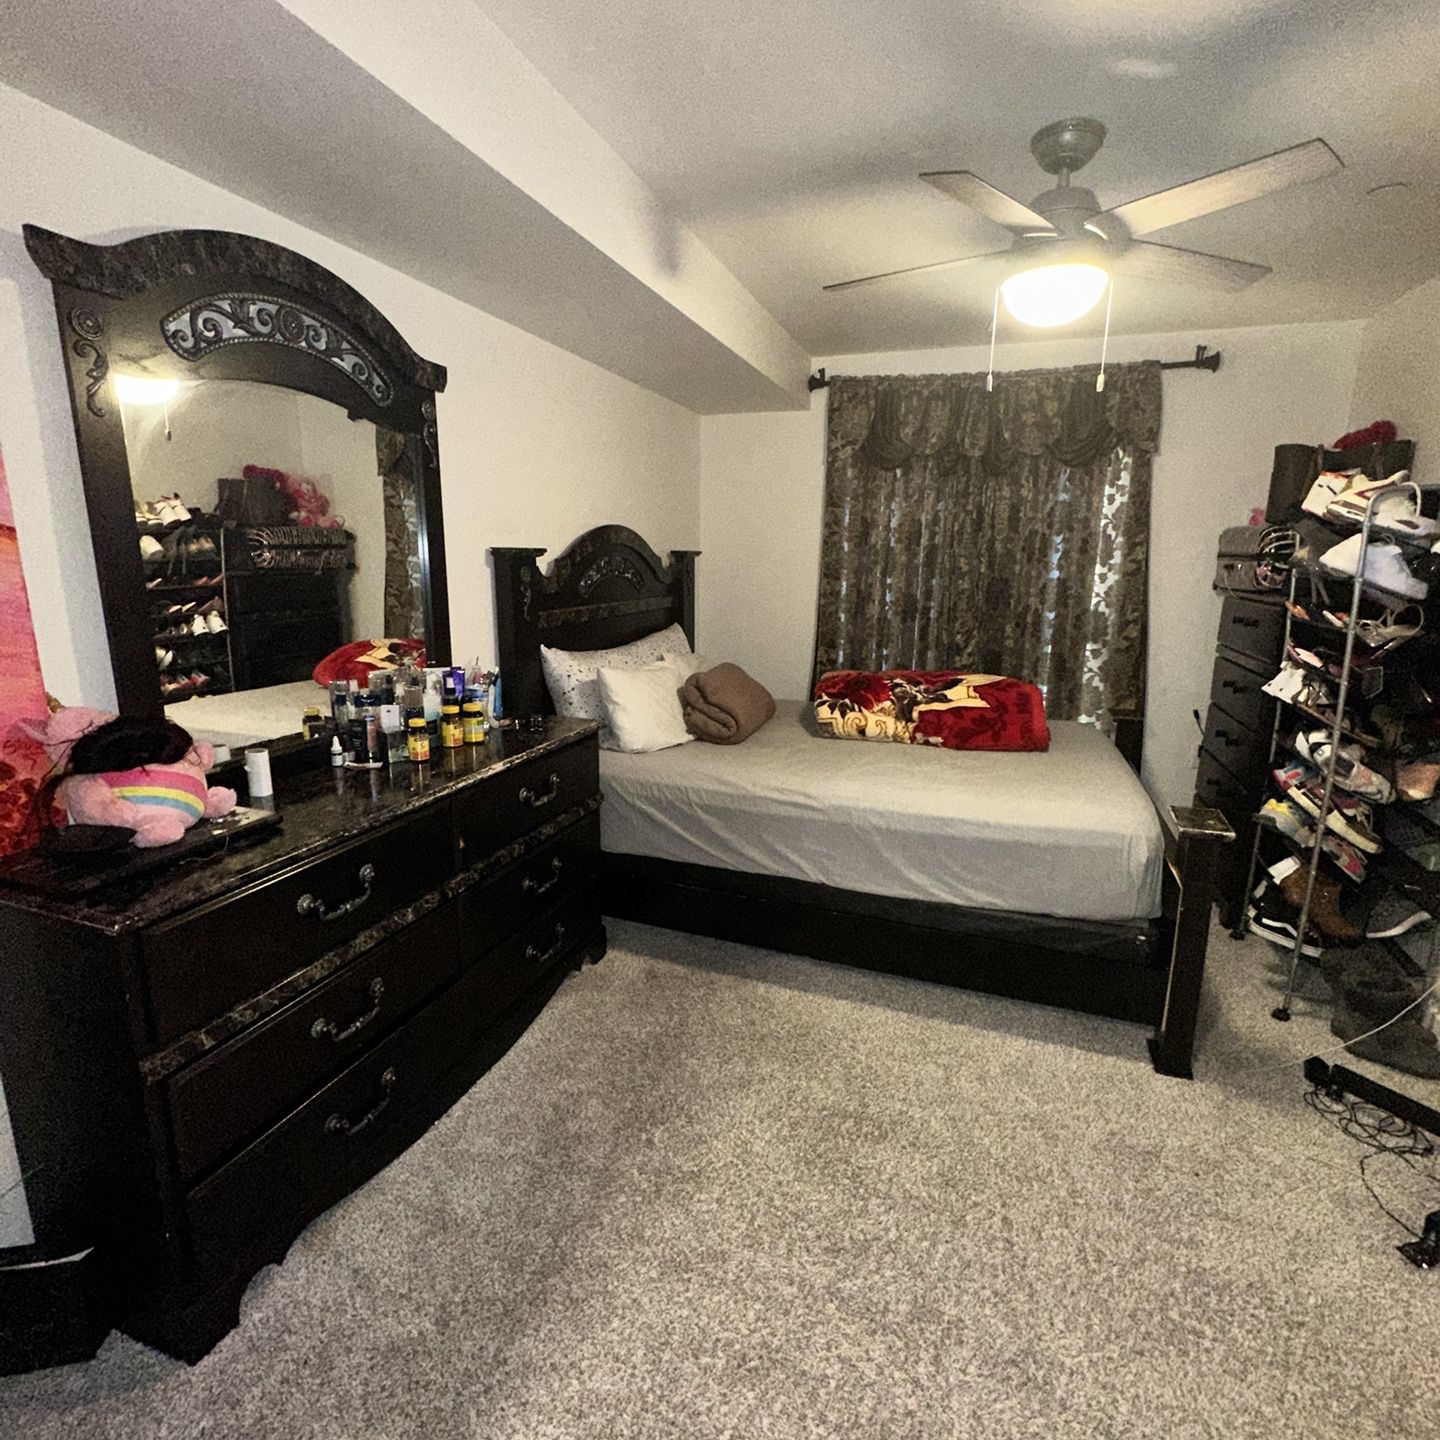 Used Clean Bedroom Set, Dinning, and Couch 